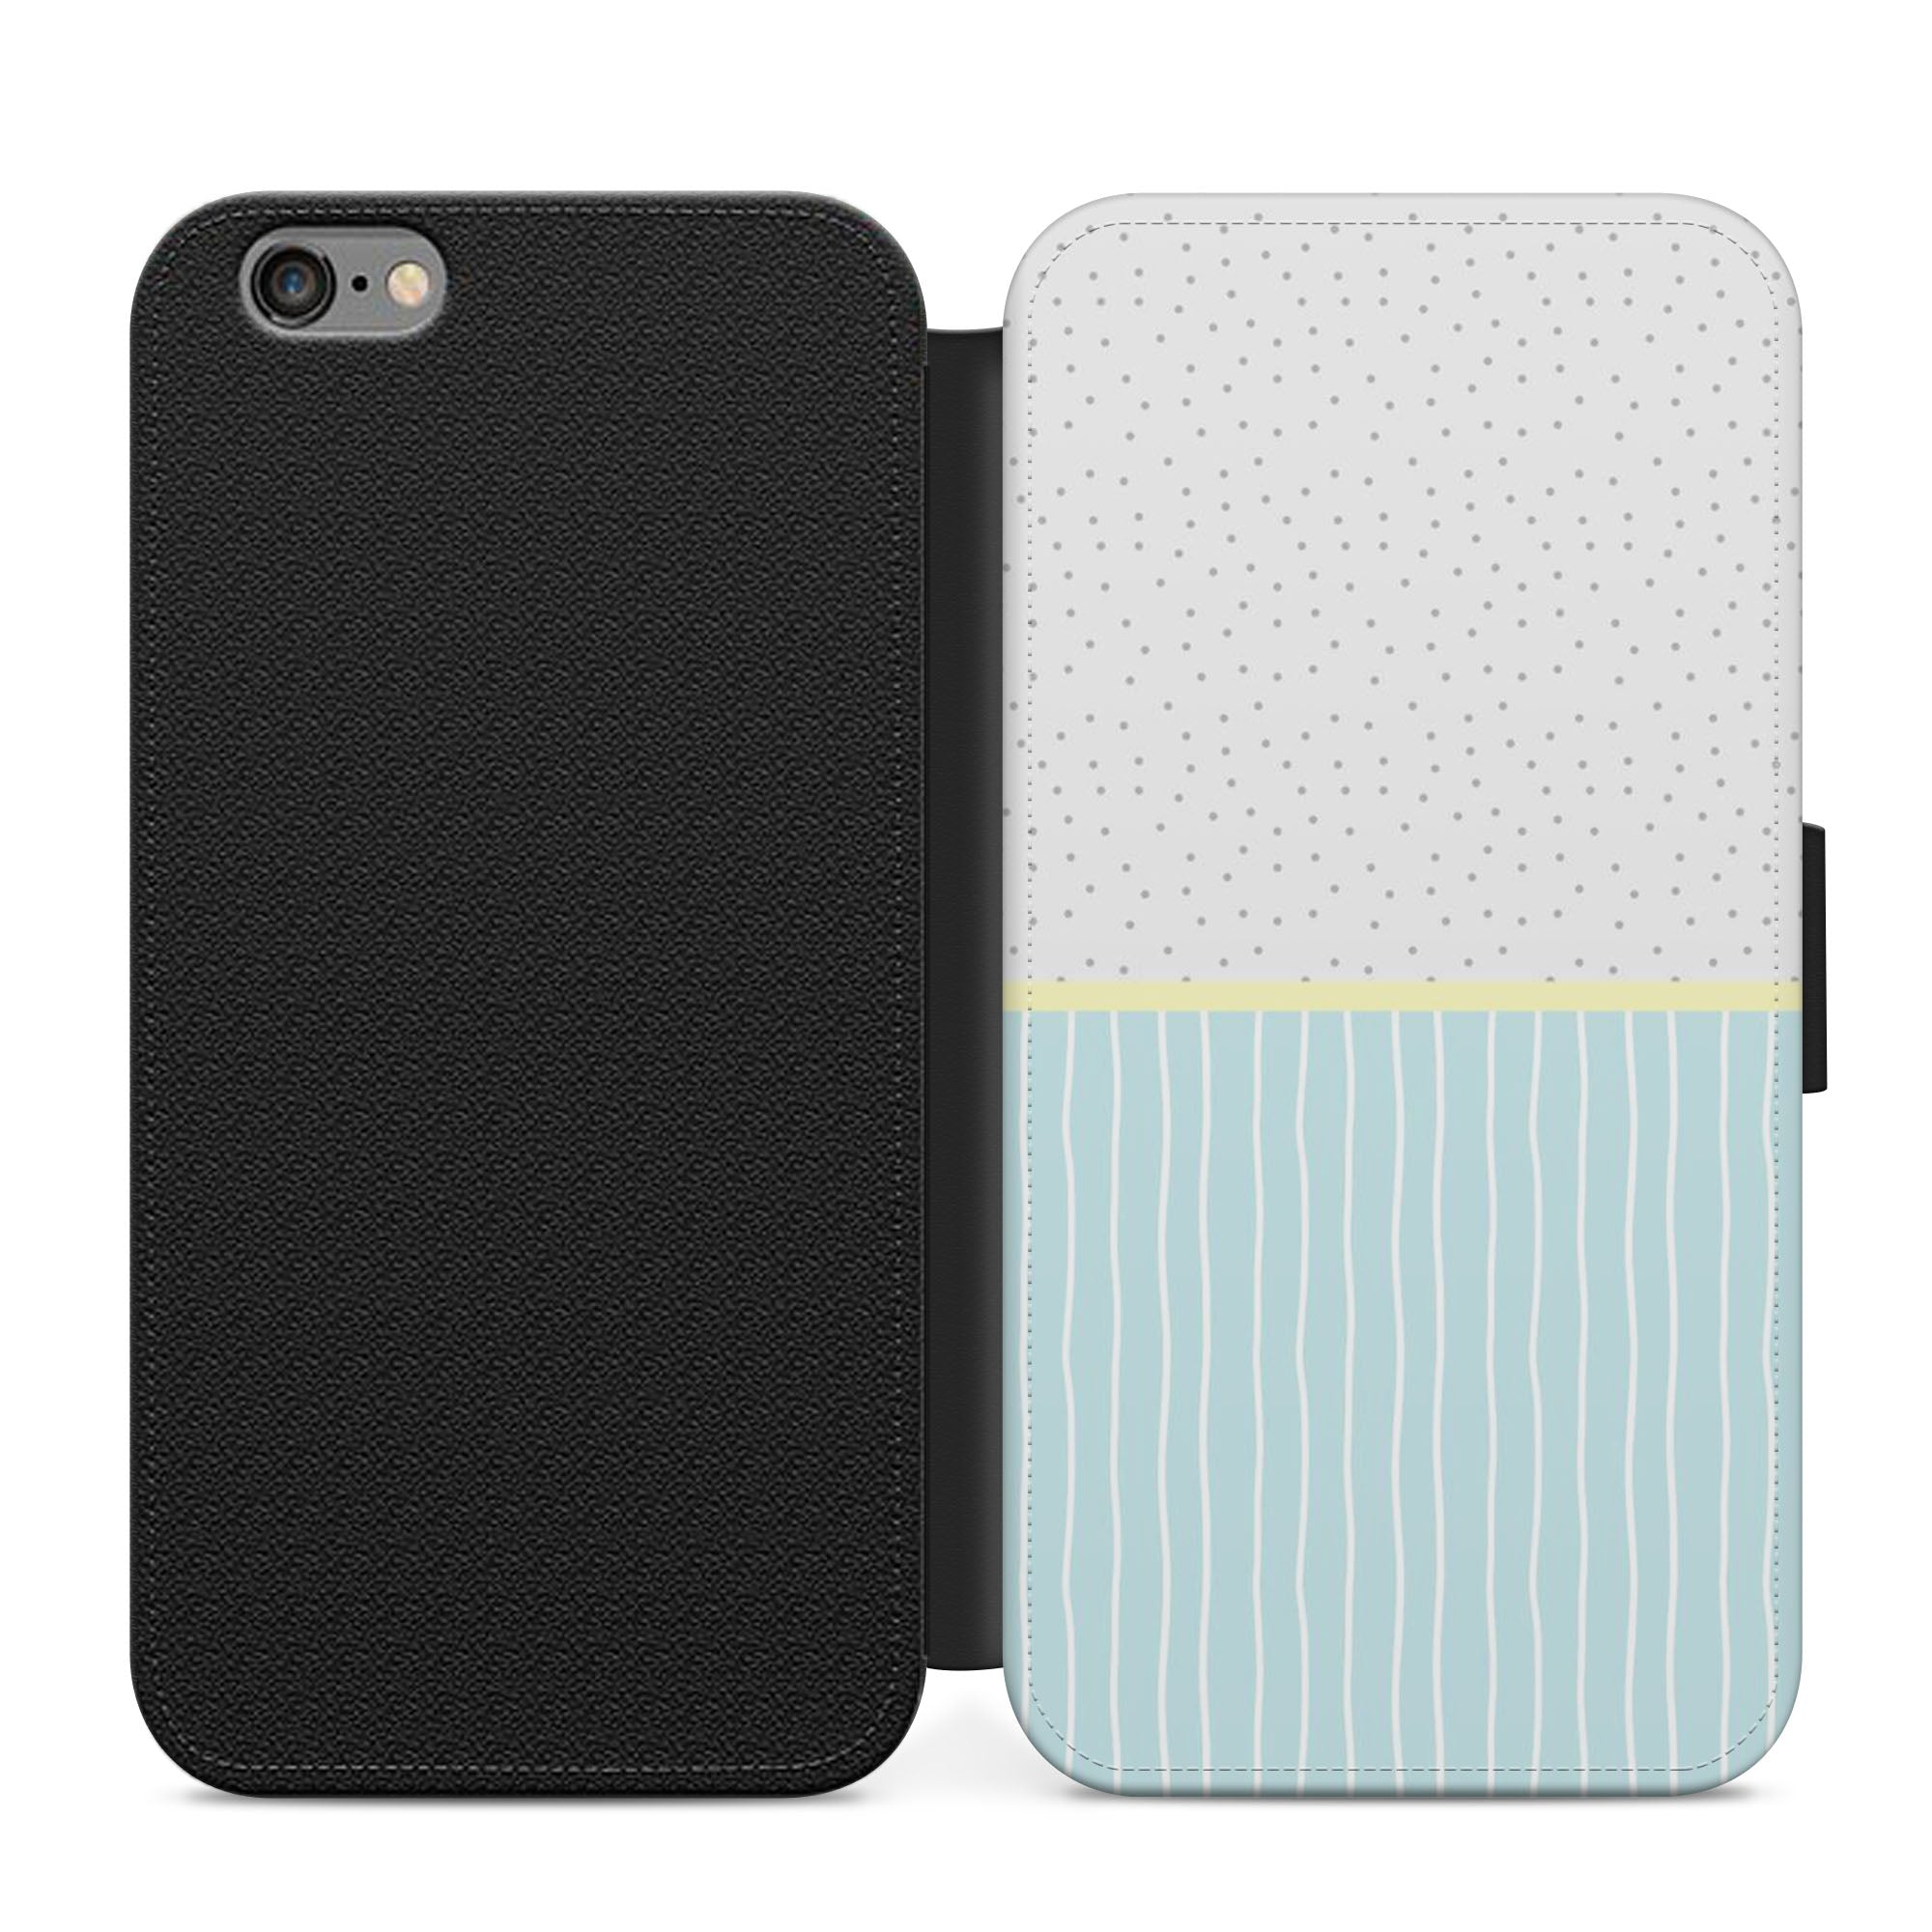 Pastel Blue Dots Pattern Faux Leather Flip Case Wallet for iPhone / Samsung